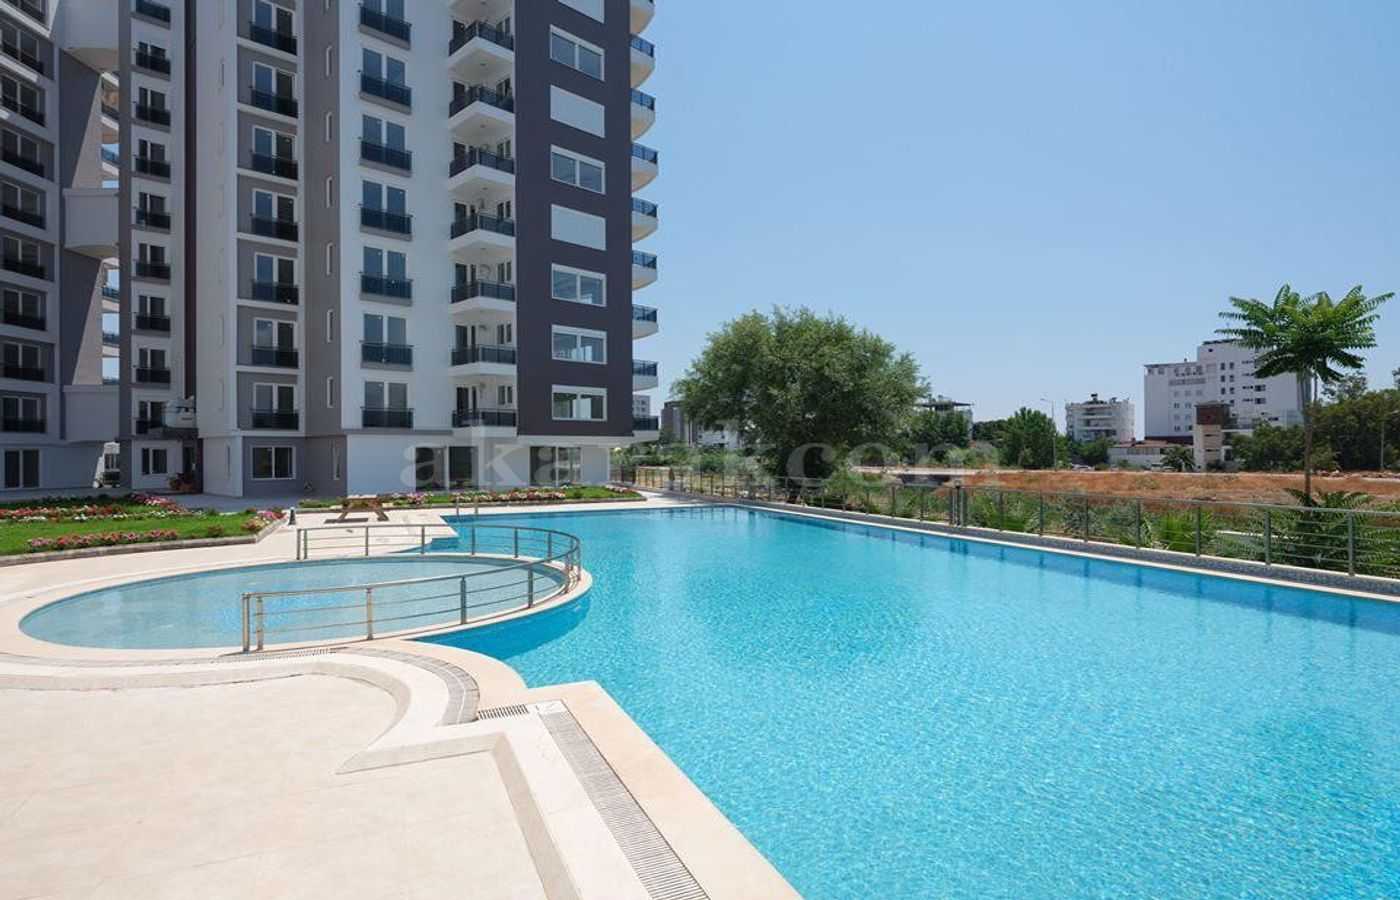 [44] Apartments For Sale in Antalya Turkey 